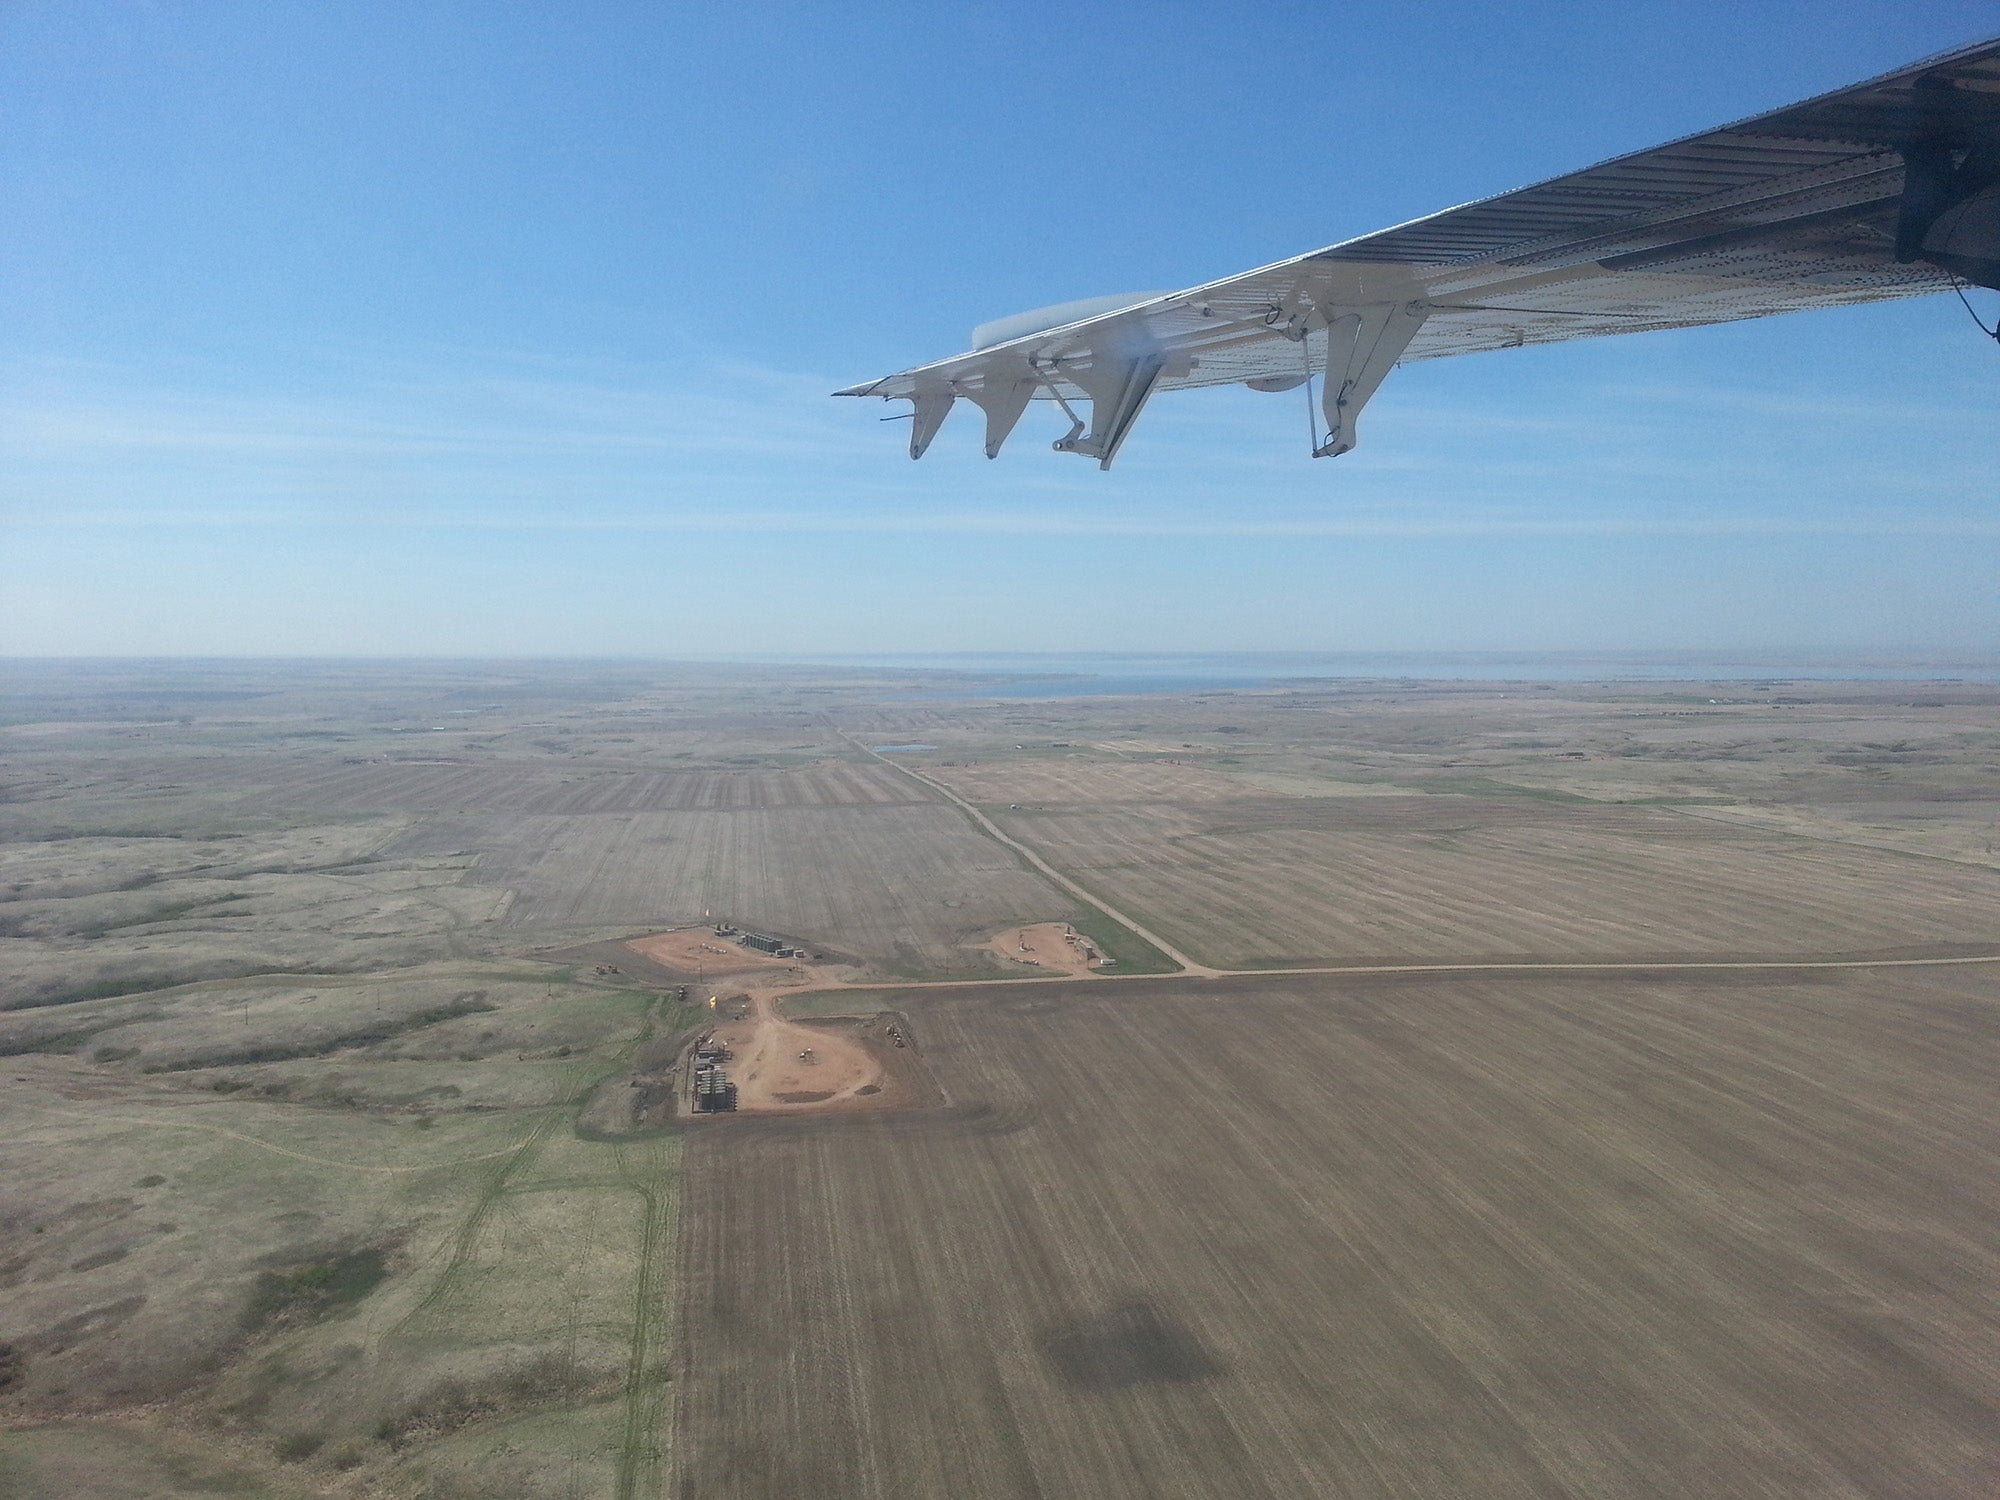 Researchers monitored emissions of ethane by flying over the Bakken Formation in the northern United States